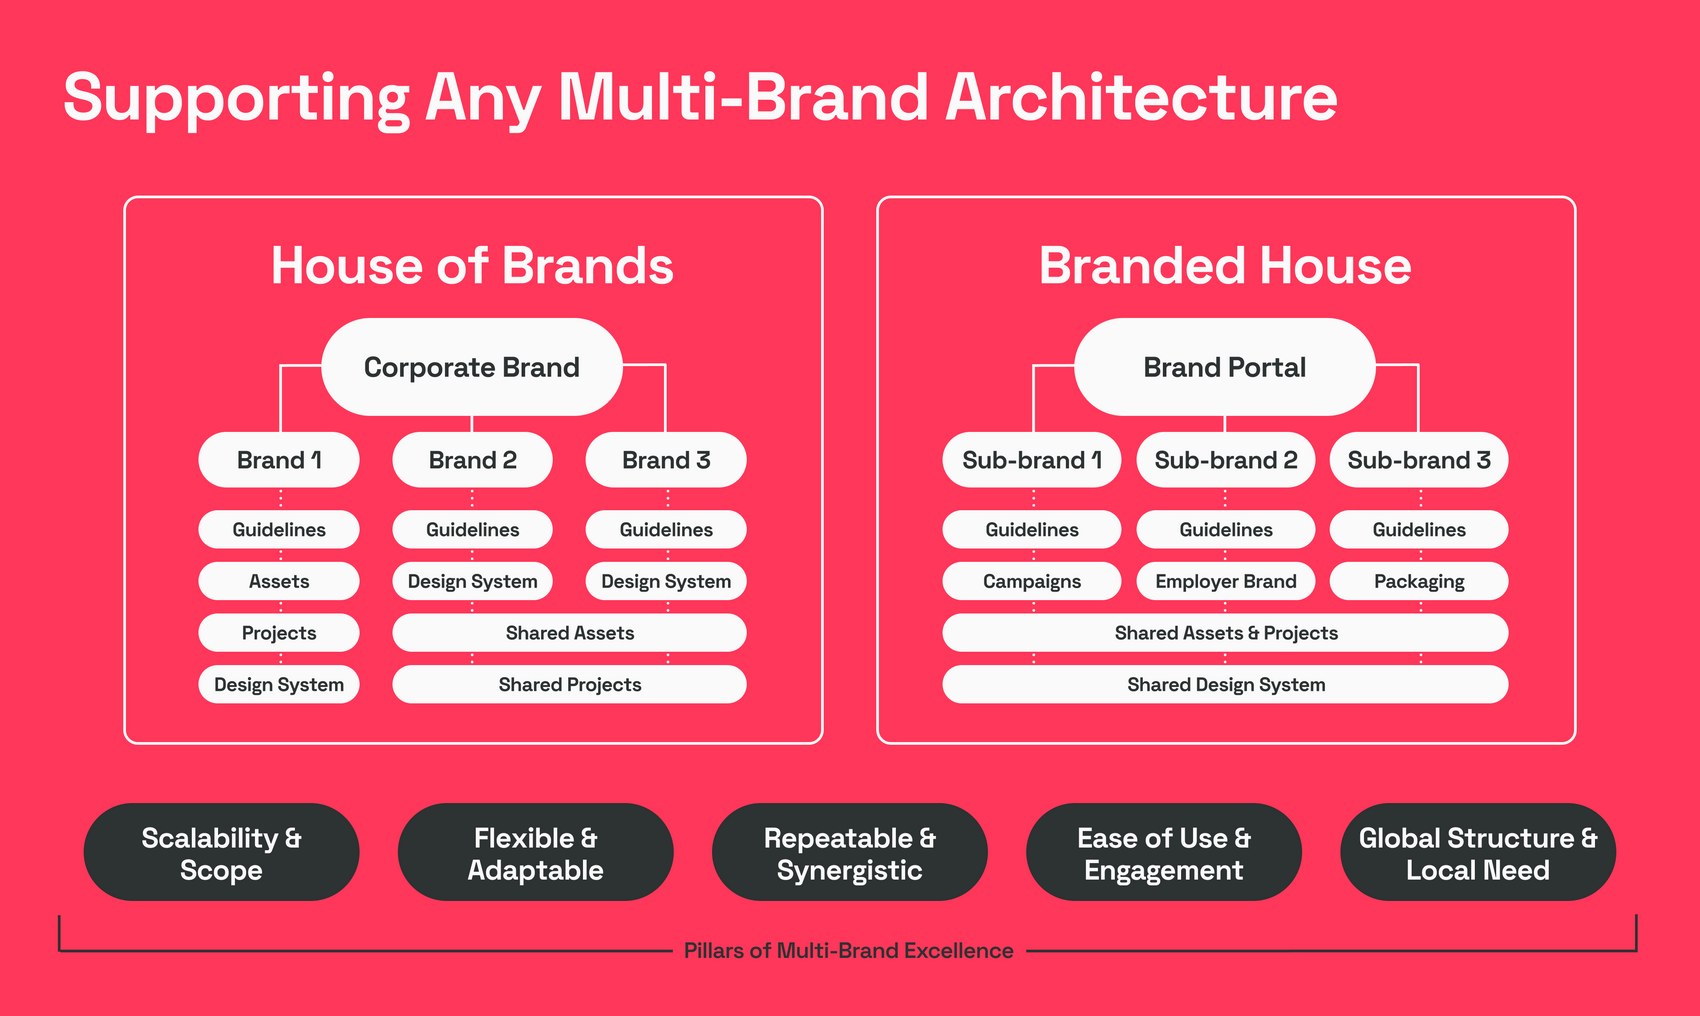 Easily Manage Several Brands in Parallel with Multi-Brand